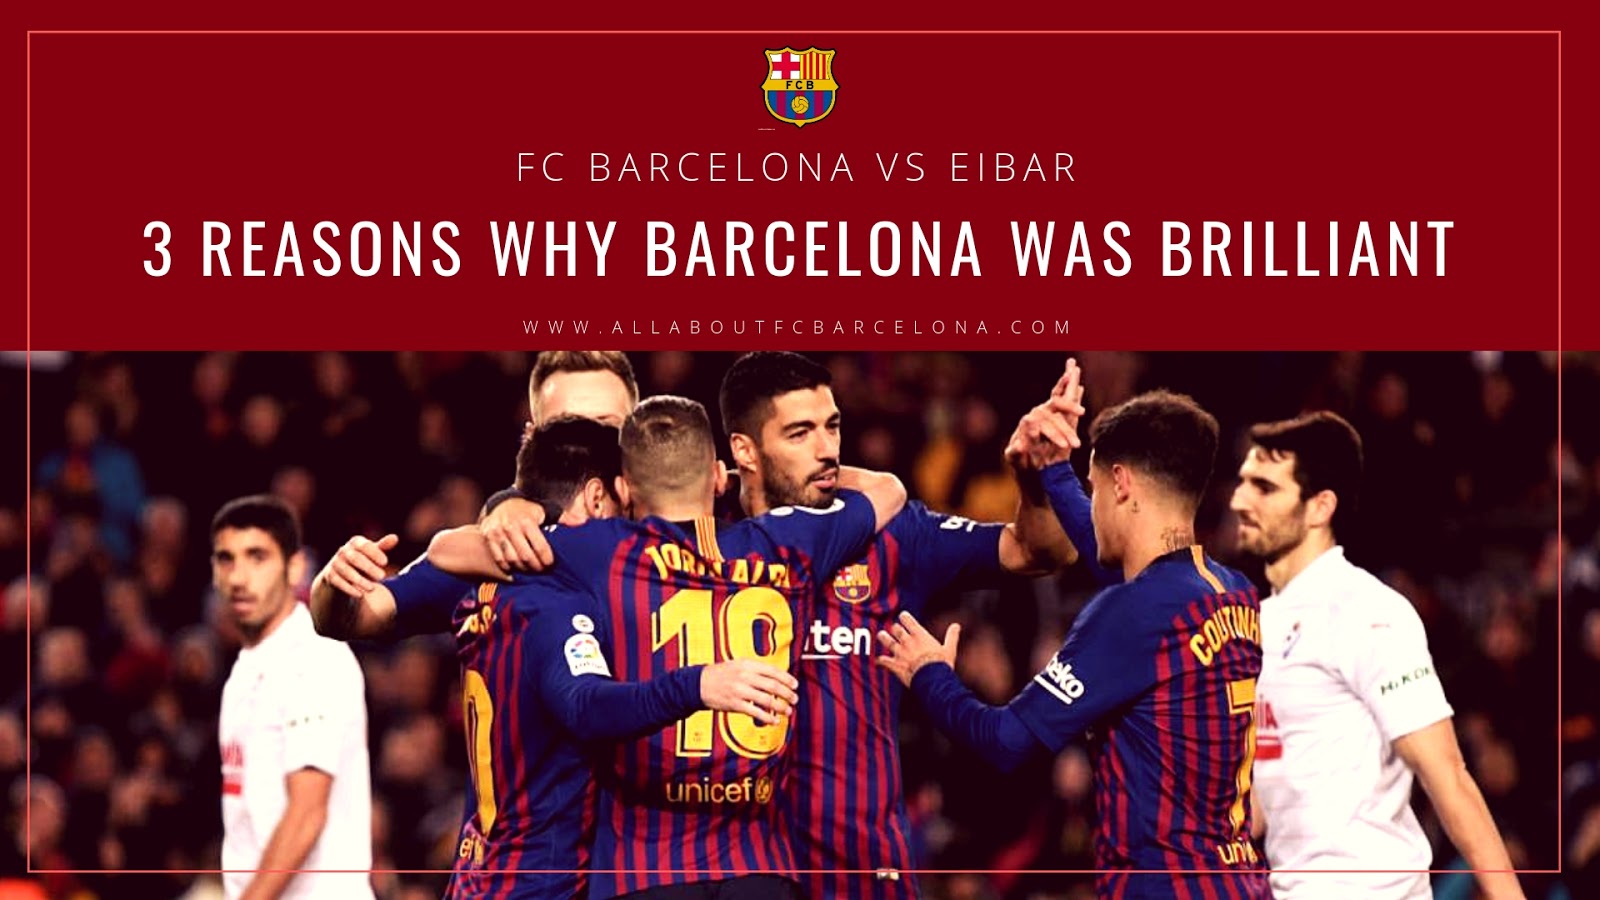 3 Reasons Why Barcelona's Victory over Eibar was Absolutely Brilliant #Barca #FCBarcelona